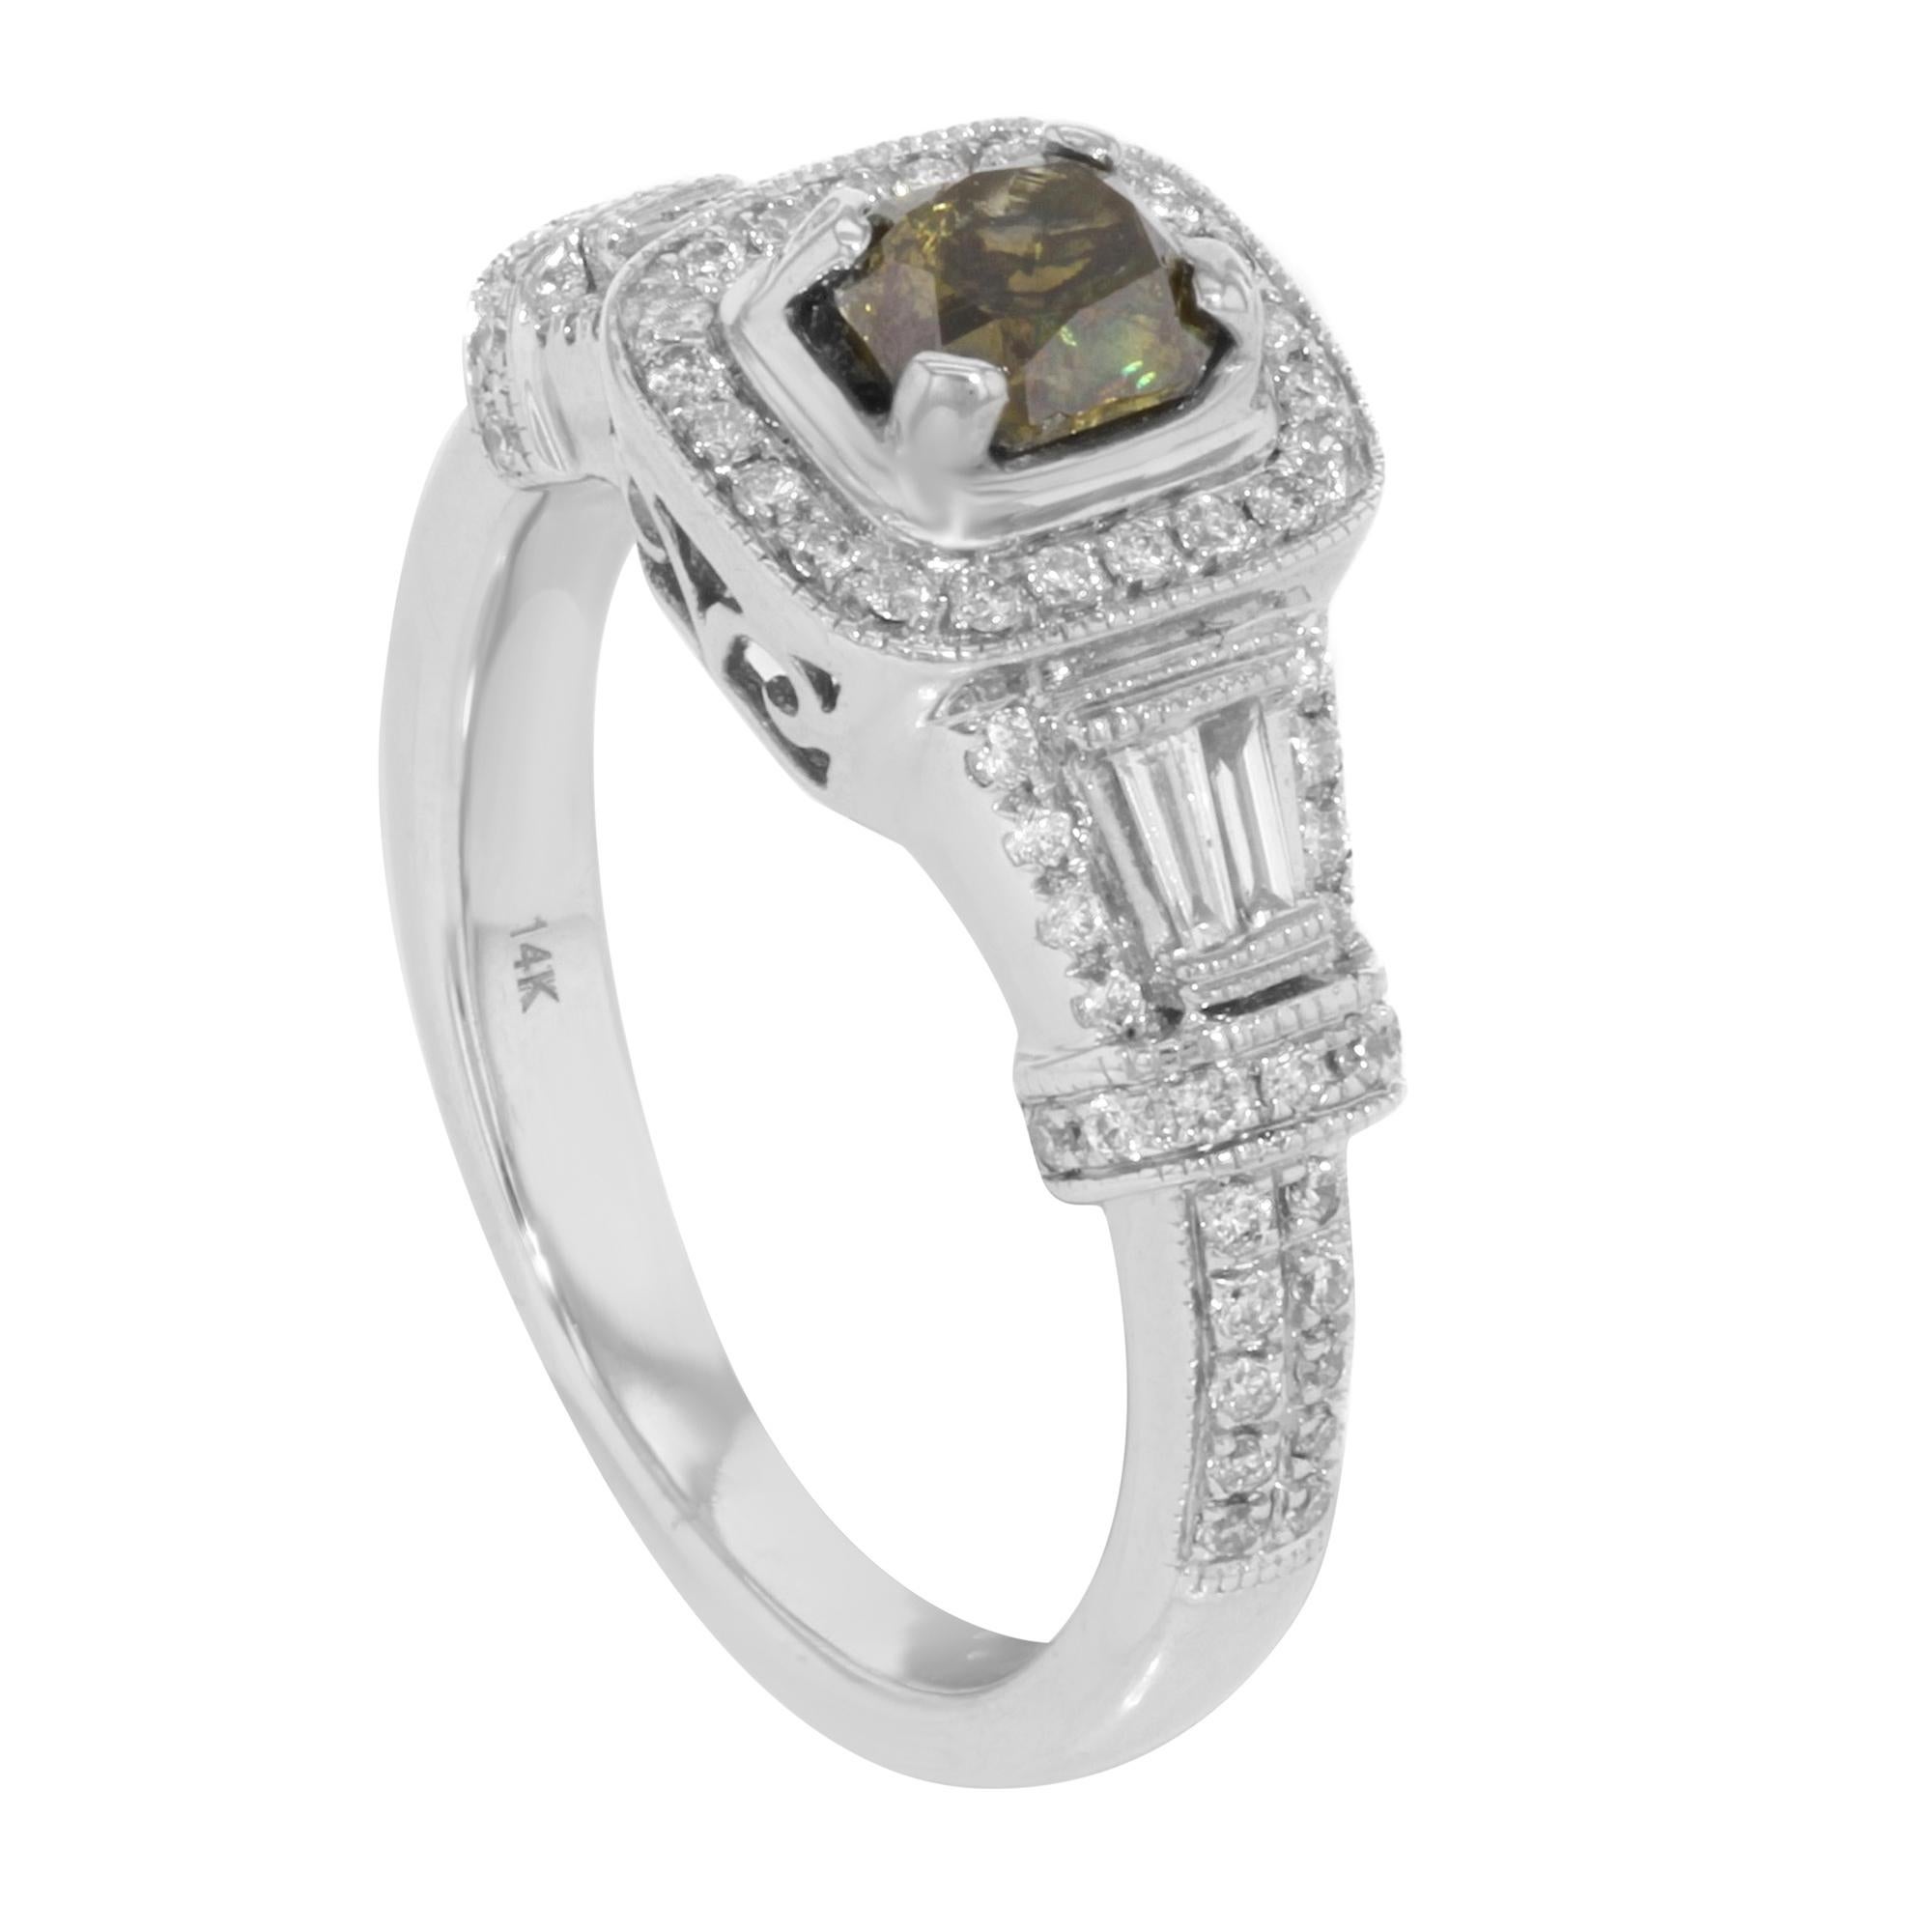 This stunning ring is crafted in 14K white gold and features a center stone: weighing approx. 0.72 cttw,  radiant cut color treated green diamond with accents stones: round cut white diamonds weighing approx. 1.22 cttw. The total diamond weight is